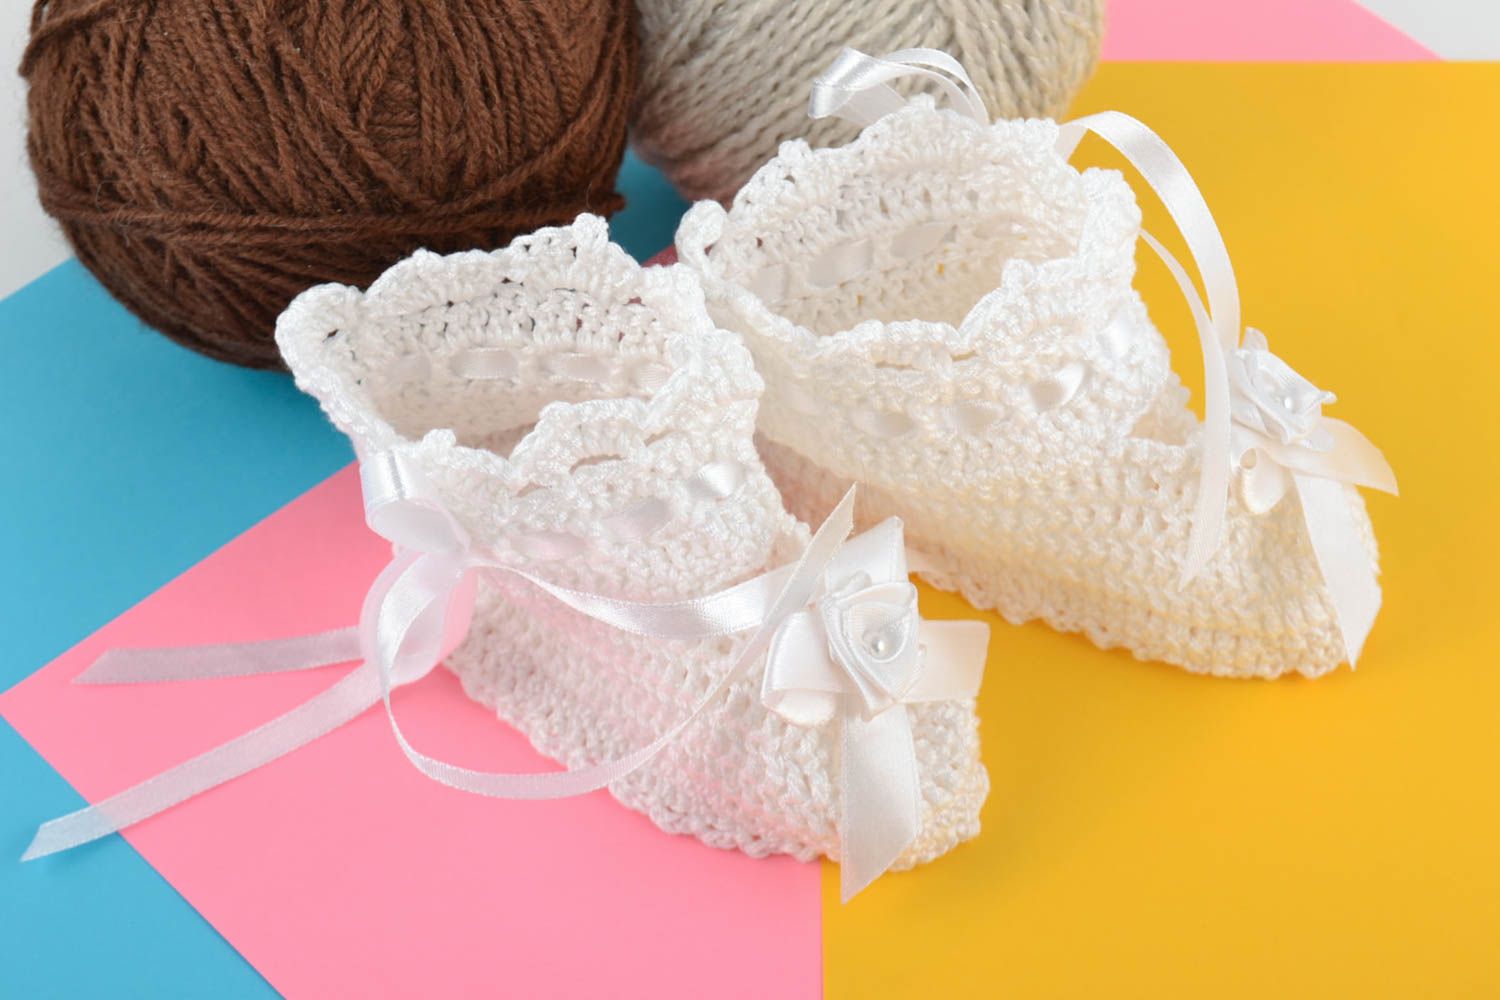 Handmade snow white lacy baby booties crocheted of cotton threads with bows photo 1